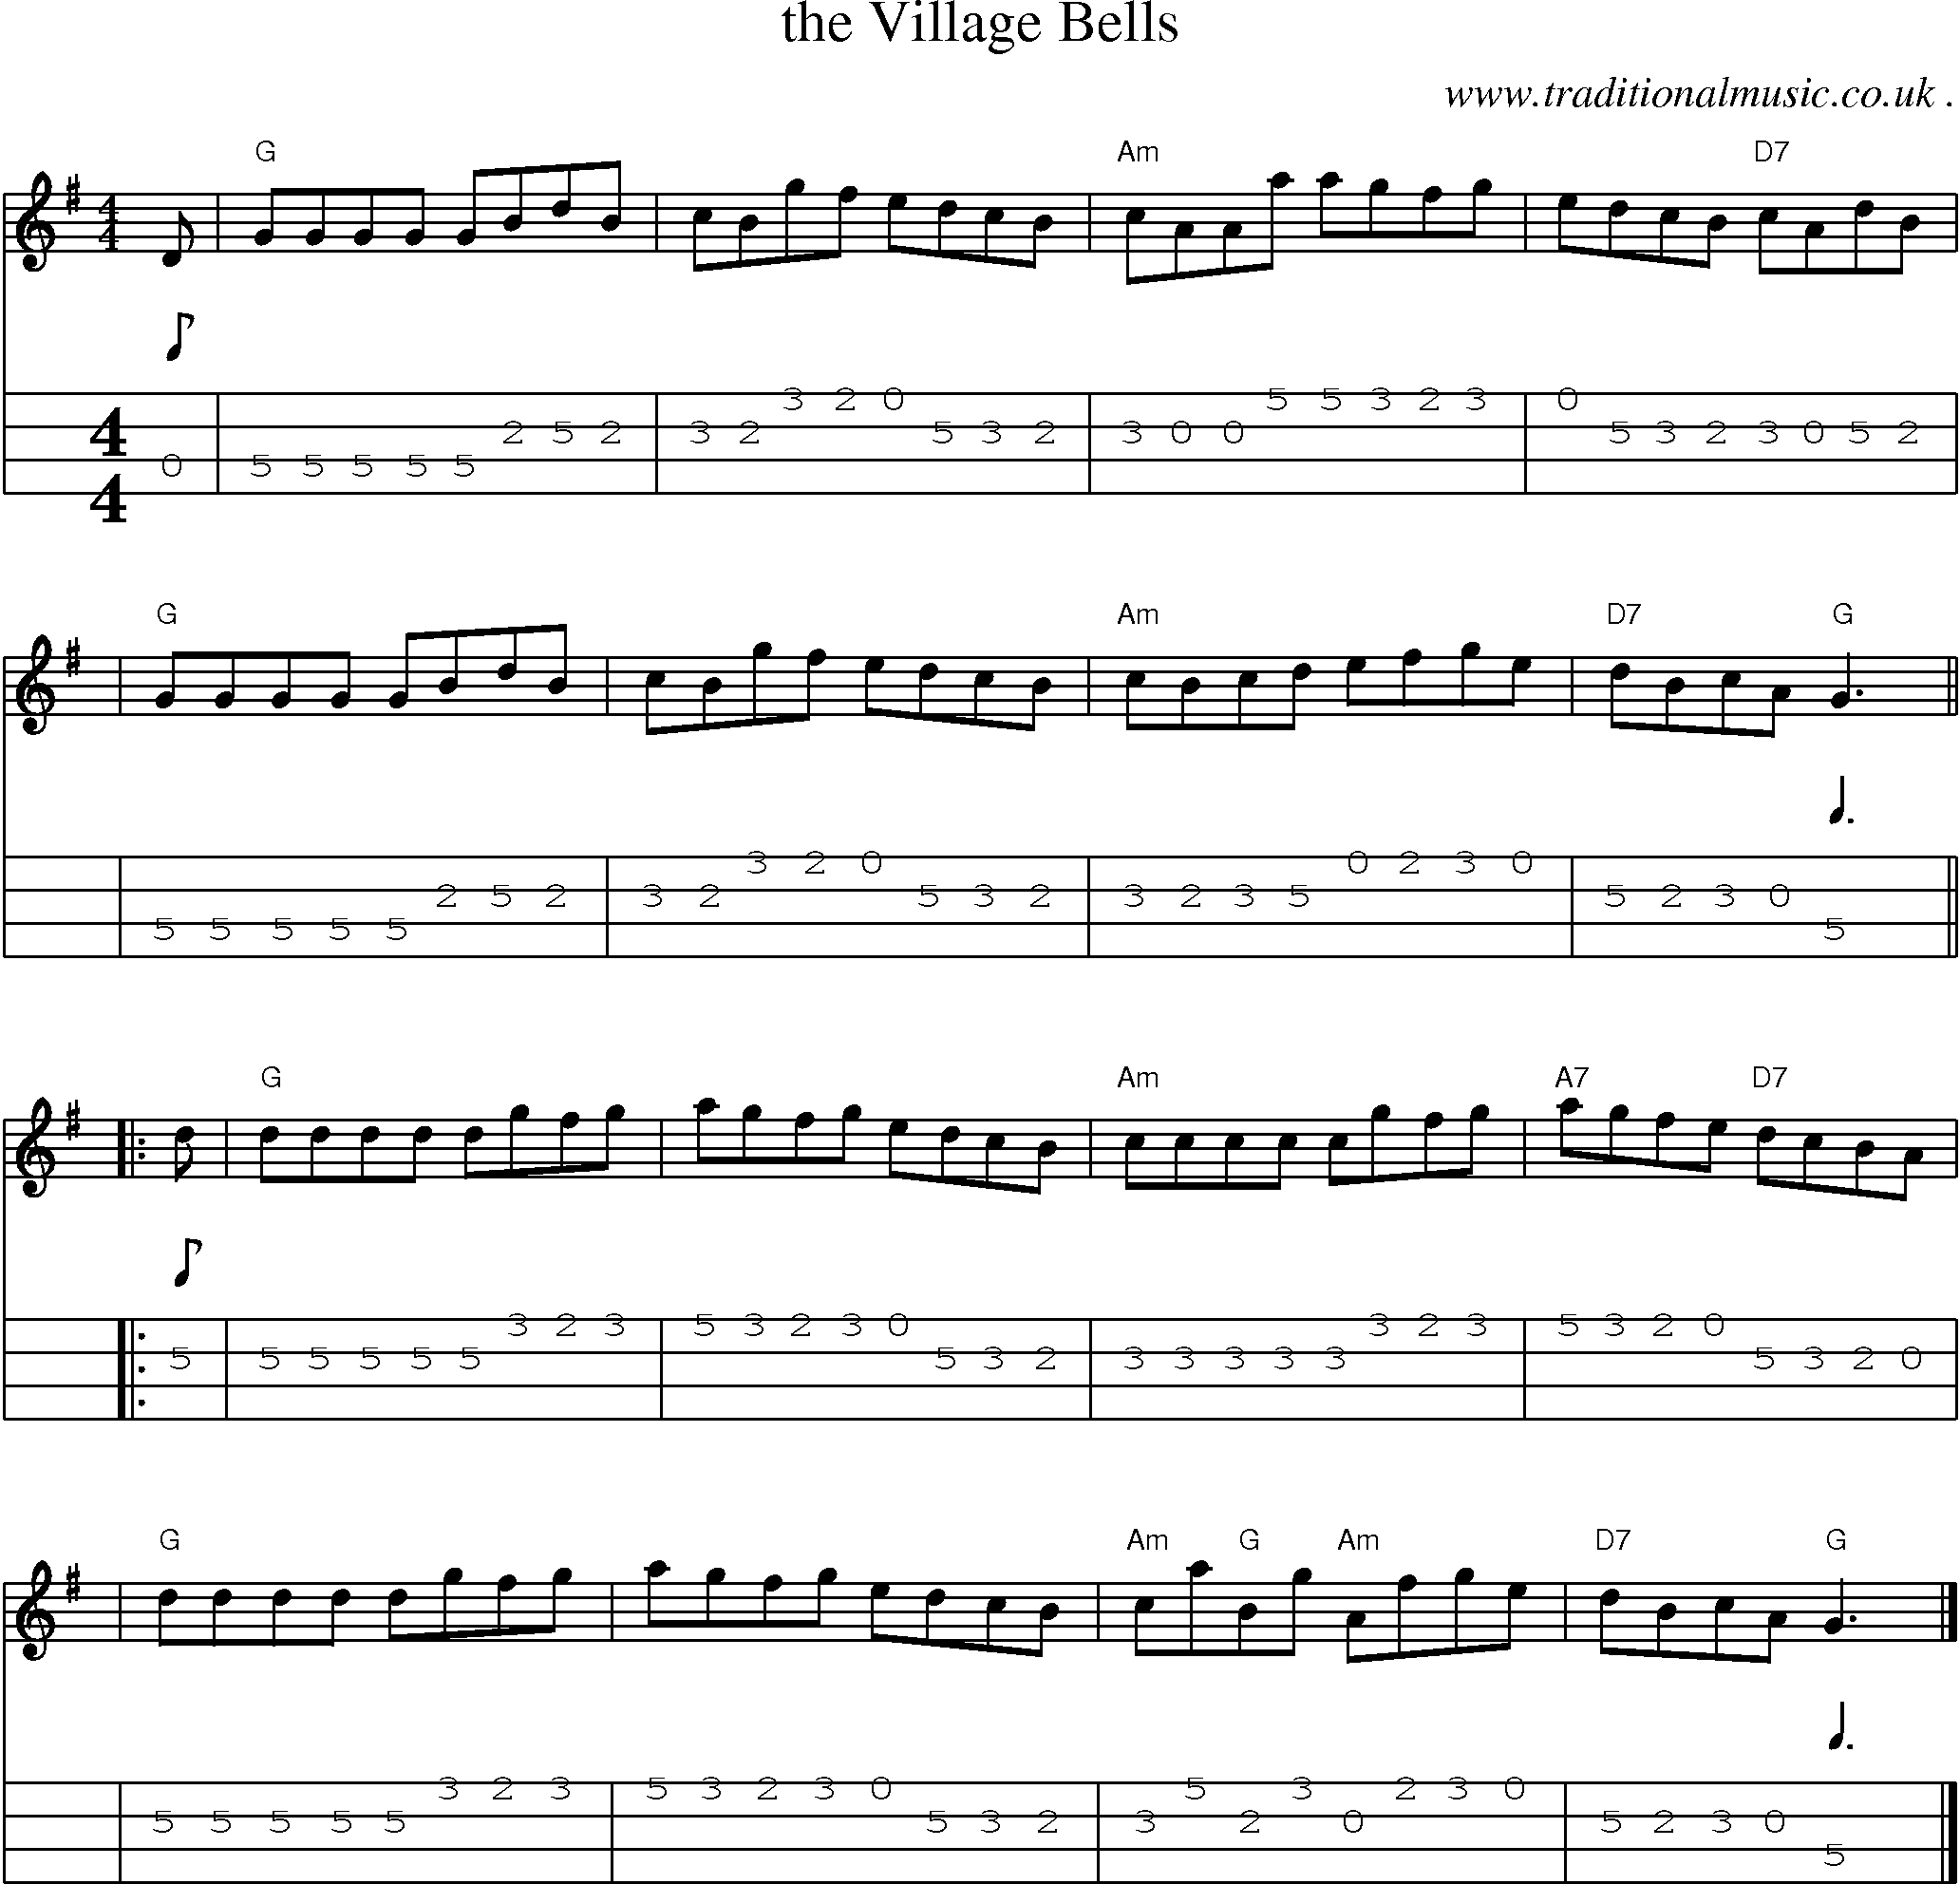 Sheet-music  score, Chords and Mandolin Tabs for The Village Bells